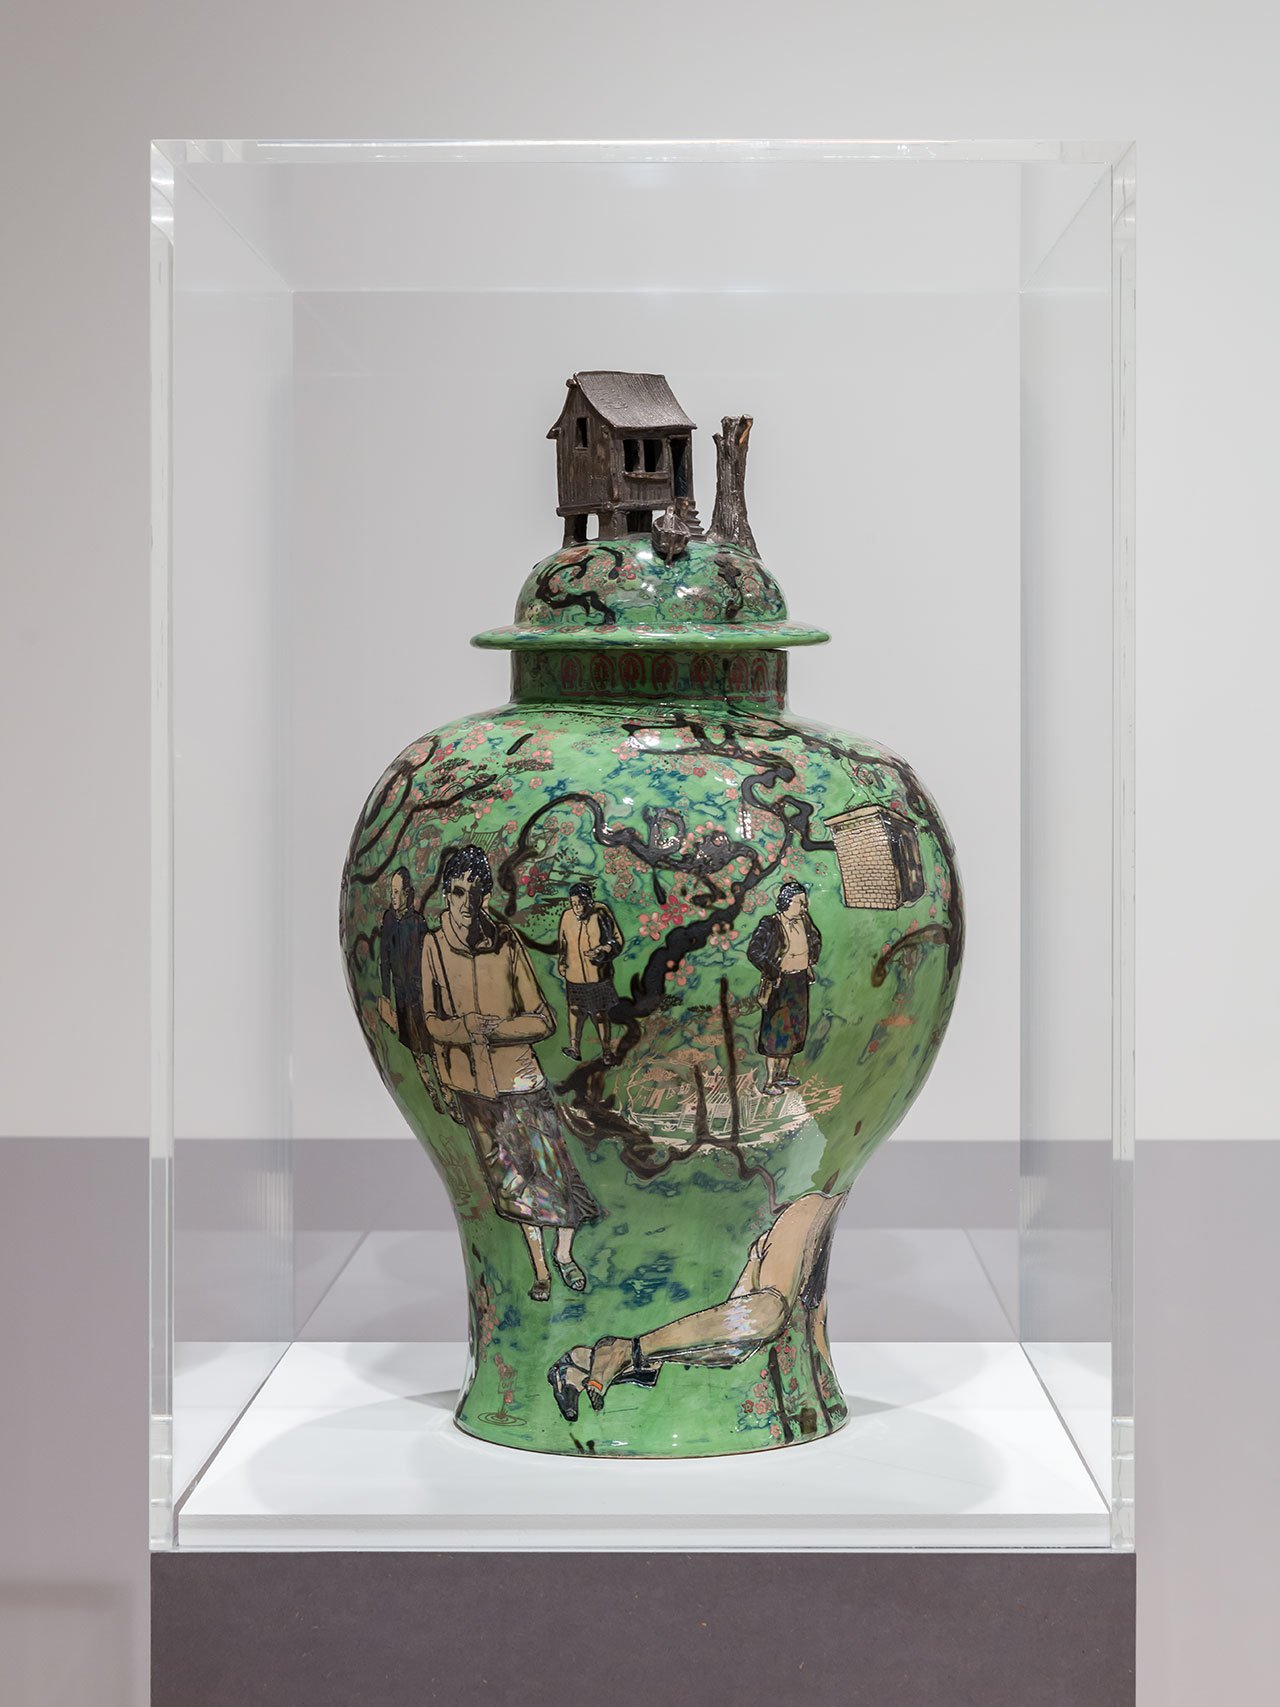 Installation view of Grayson Perry, Strange Clay: Ceramics in Contemporary Art at the Hayward Gallery (26 October 2022 - 8 January 2023). Photo: Mark Blower. Courtesy the Hayward Gallery.